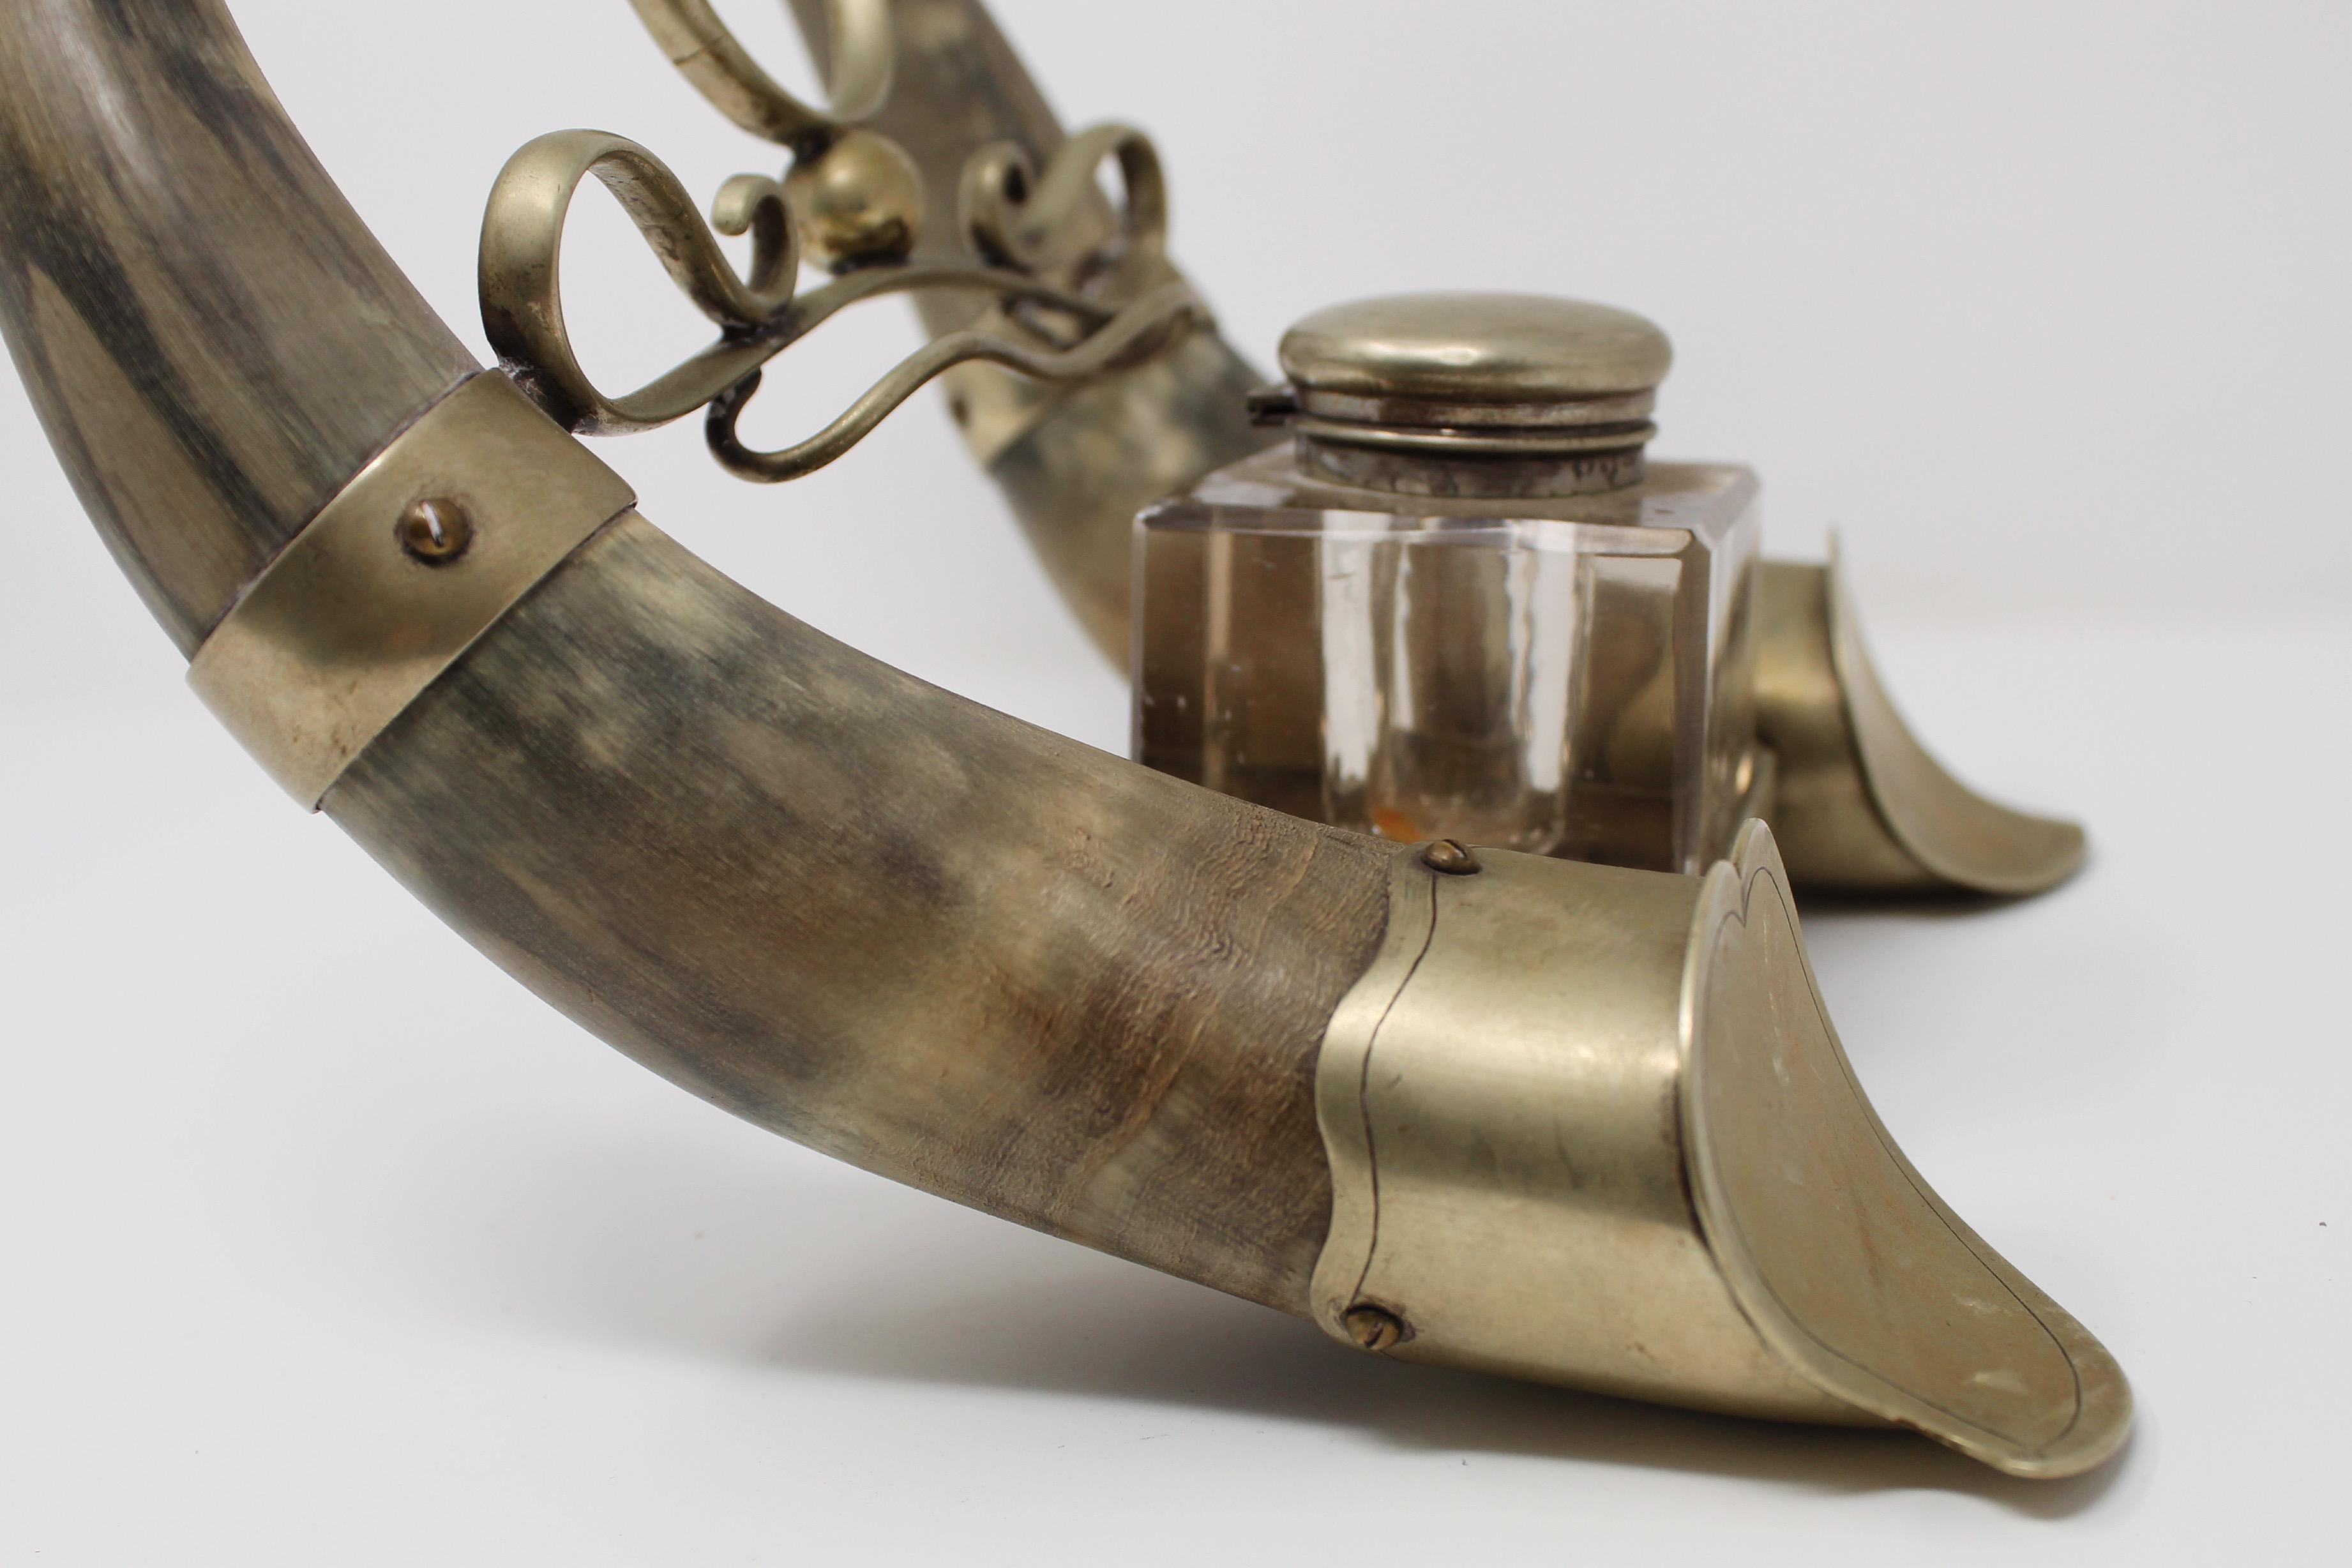 Incredible late 19th century inkwell, two horns and mounted pewter and brass fittings, a stunning combination.

The large inkwell is made from a substantial piece of crystal with a hinged lid, some usual wear to the plate, crystal and selling as